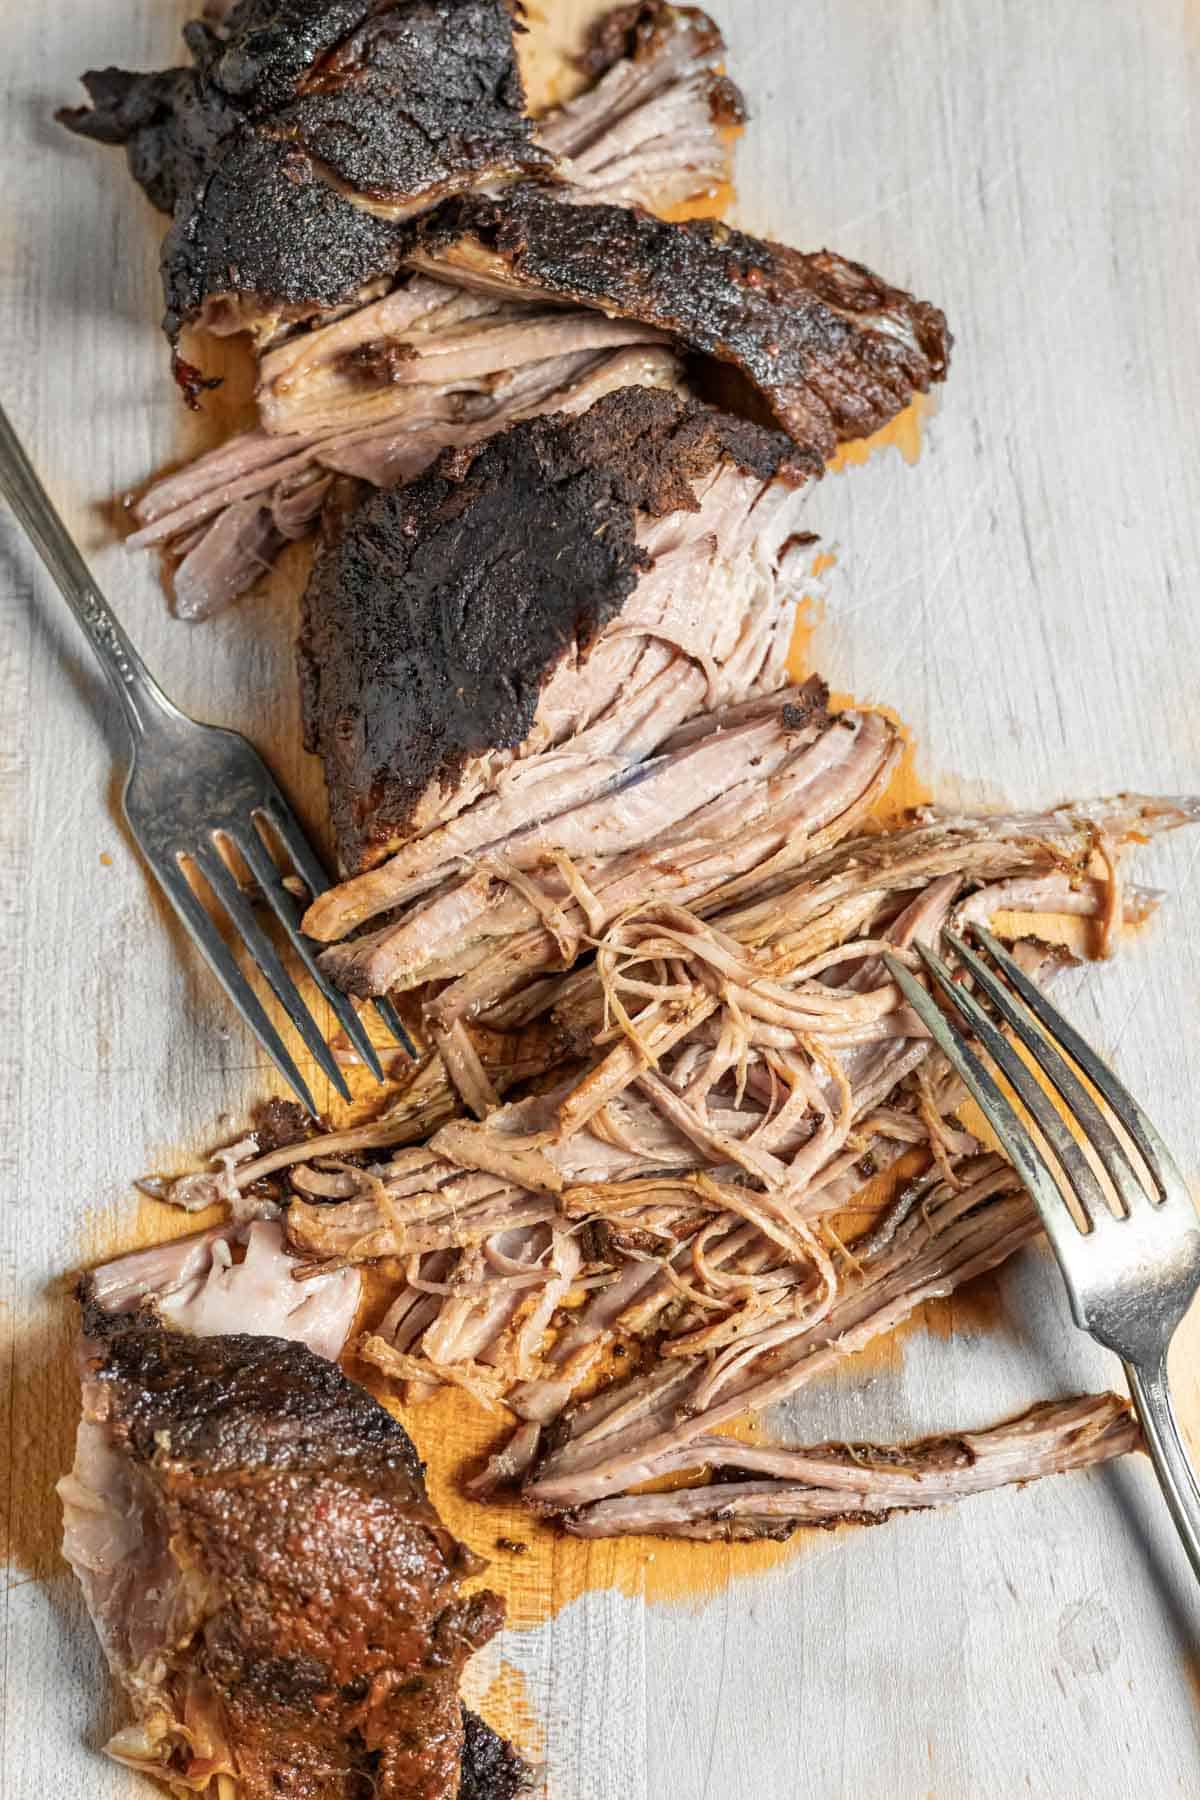 Tender pork partly shredded on a wood board with two forks and showing the crusty bark.